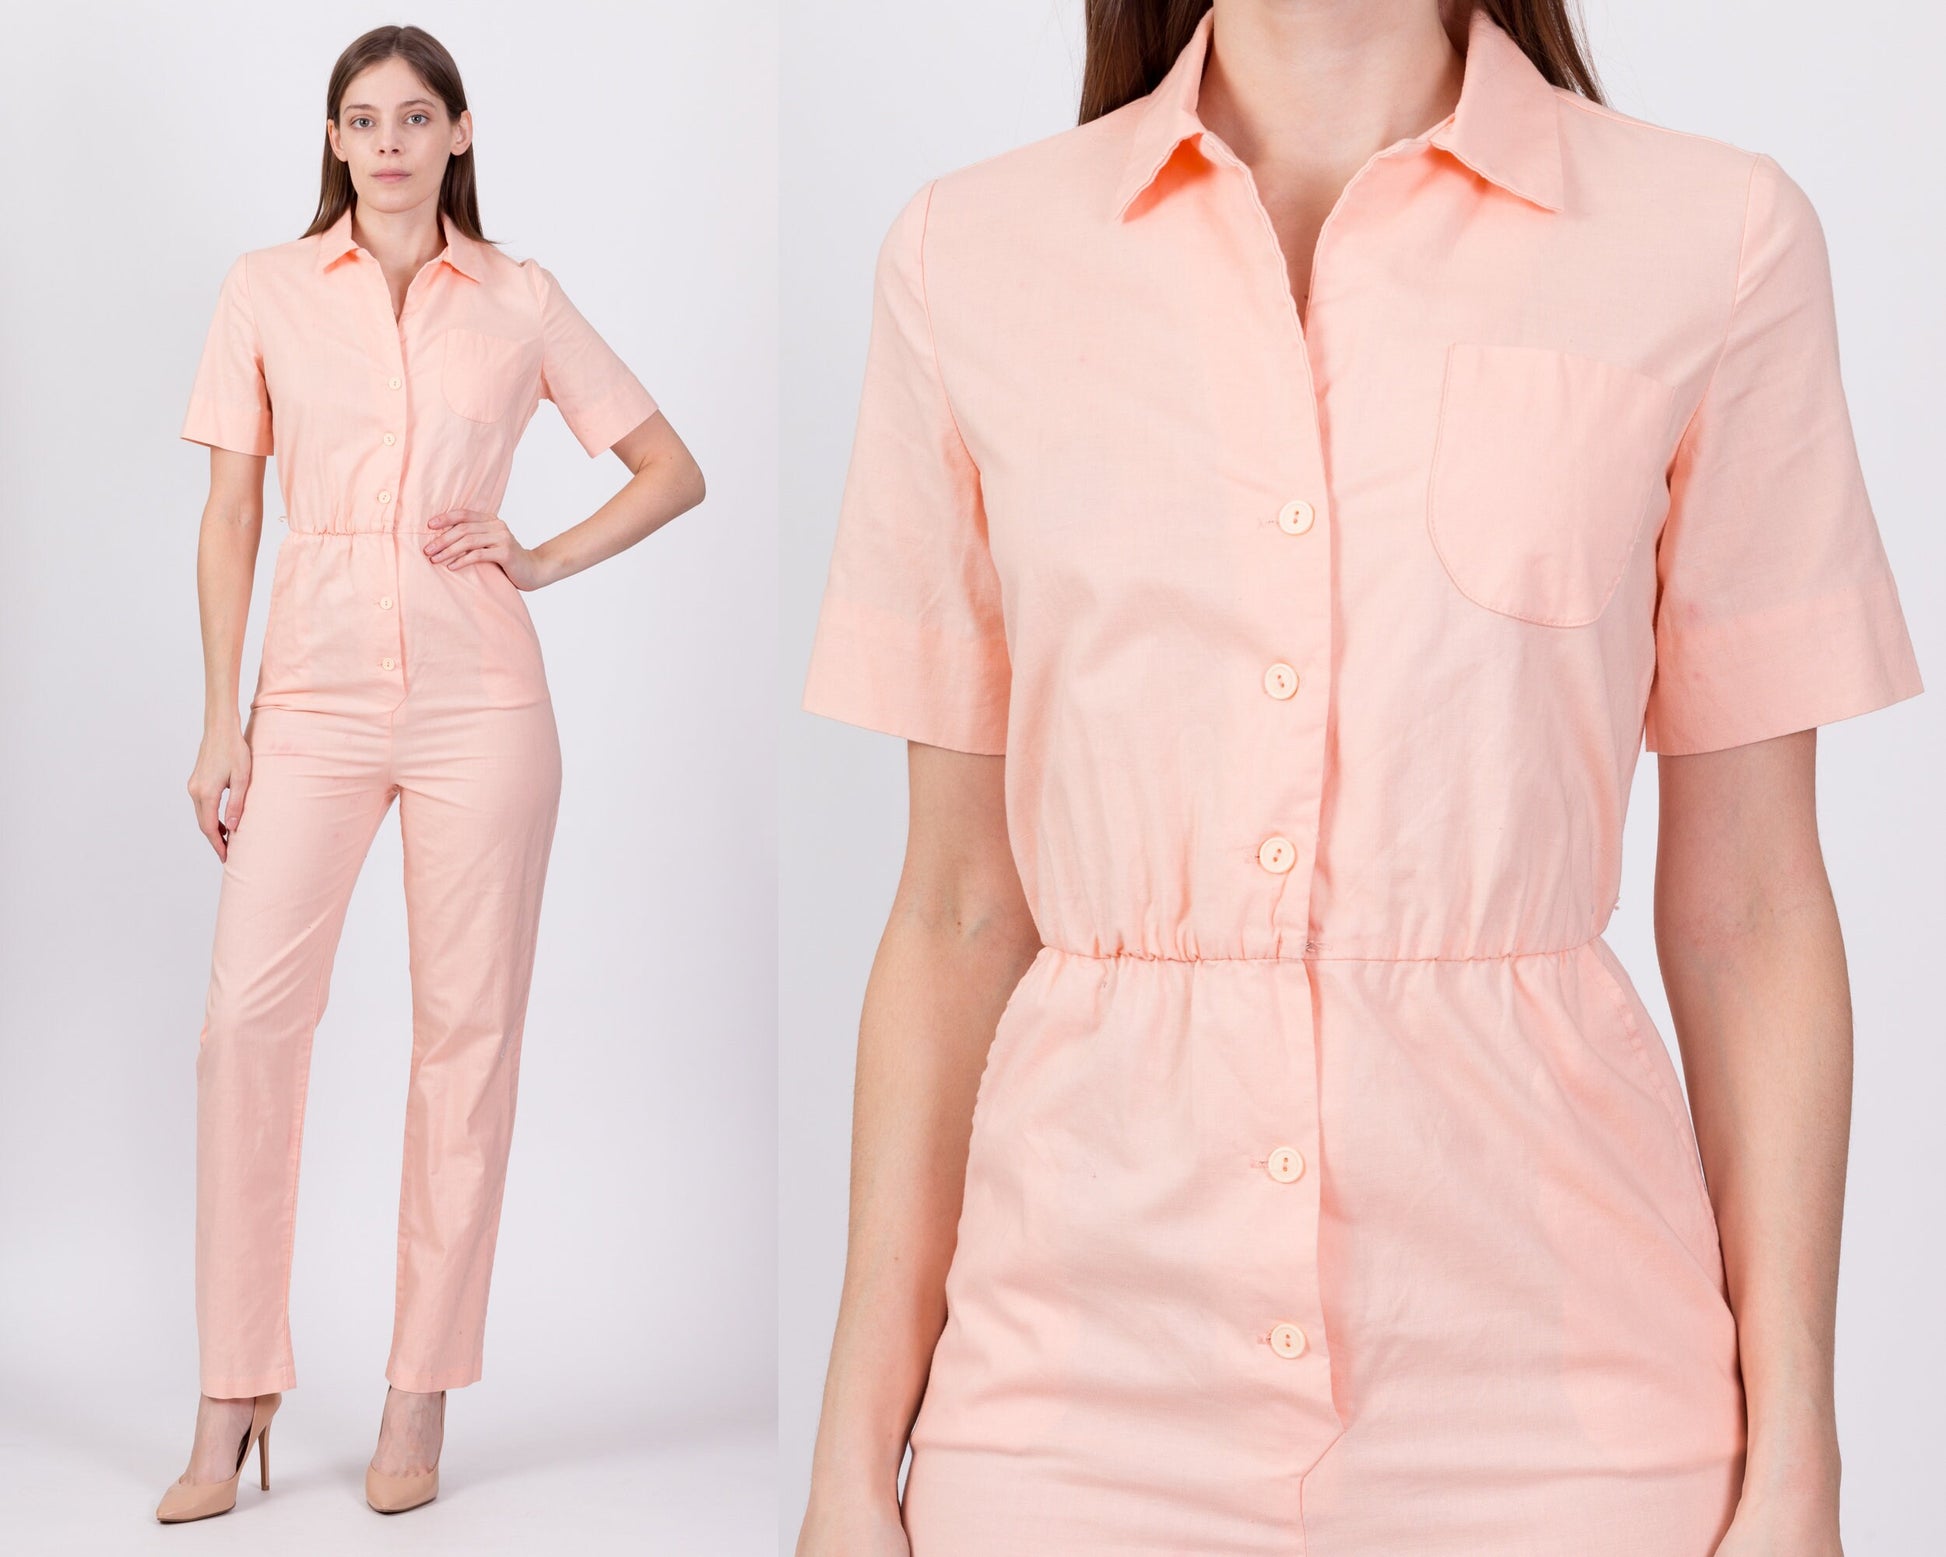 80s Peach Button Front Jumpsuit - Small